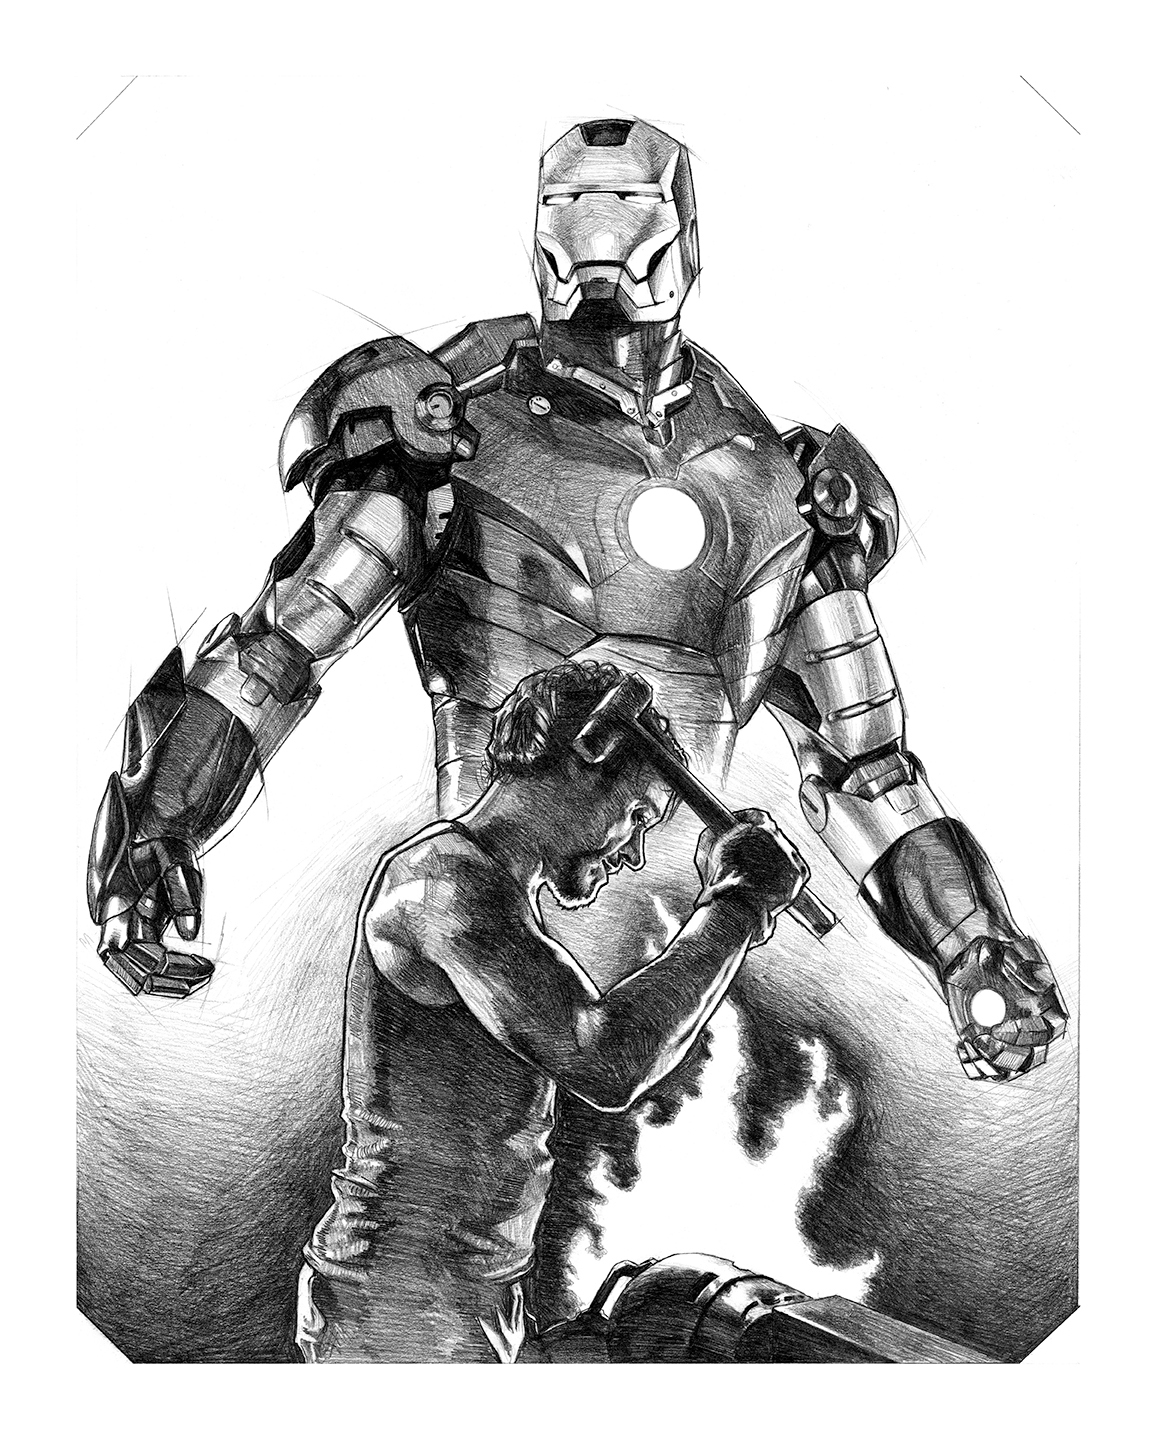 Iron Man 2 Pencil drawing by Paul Stowe | Artfinder